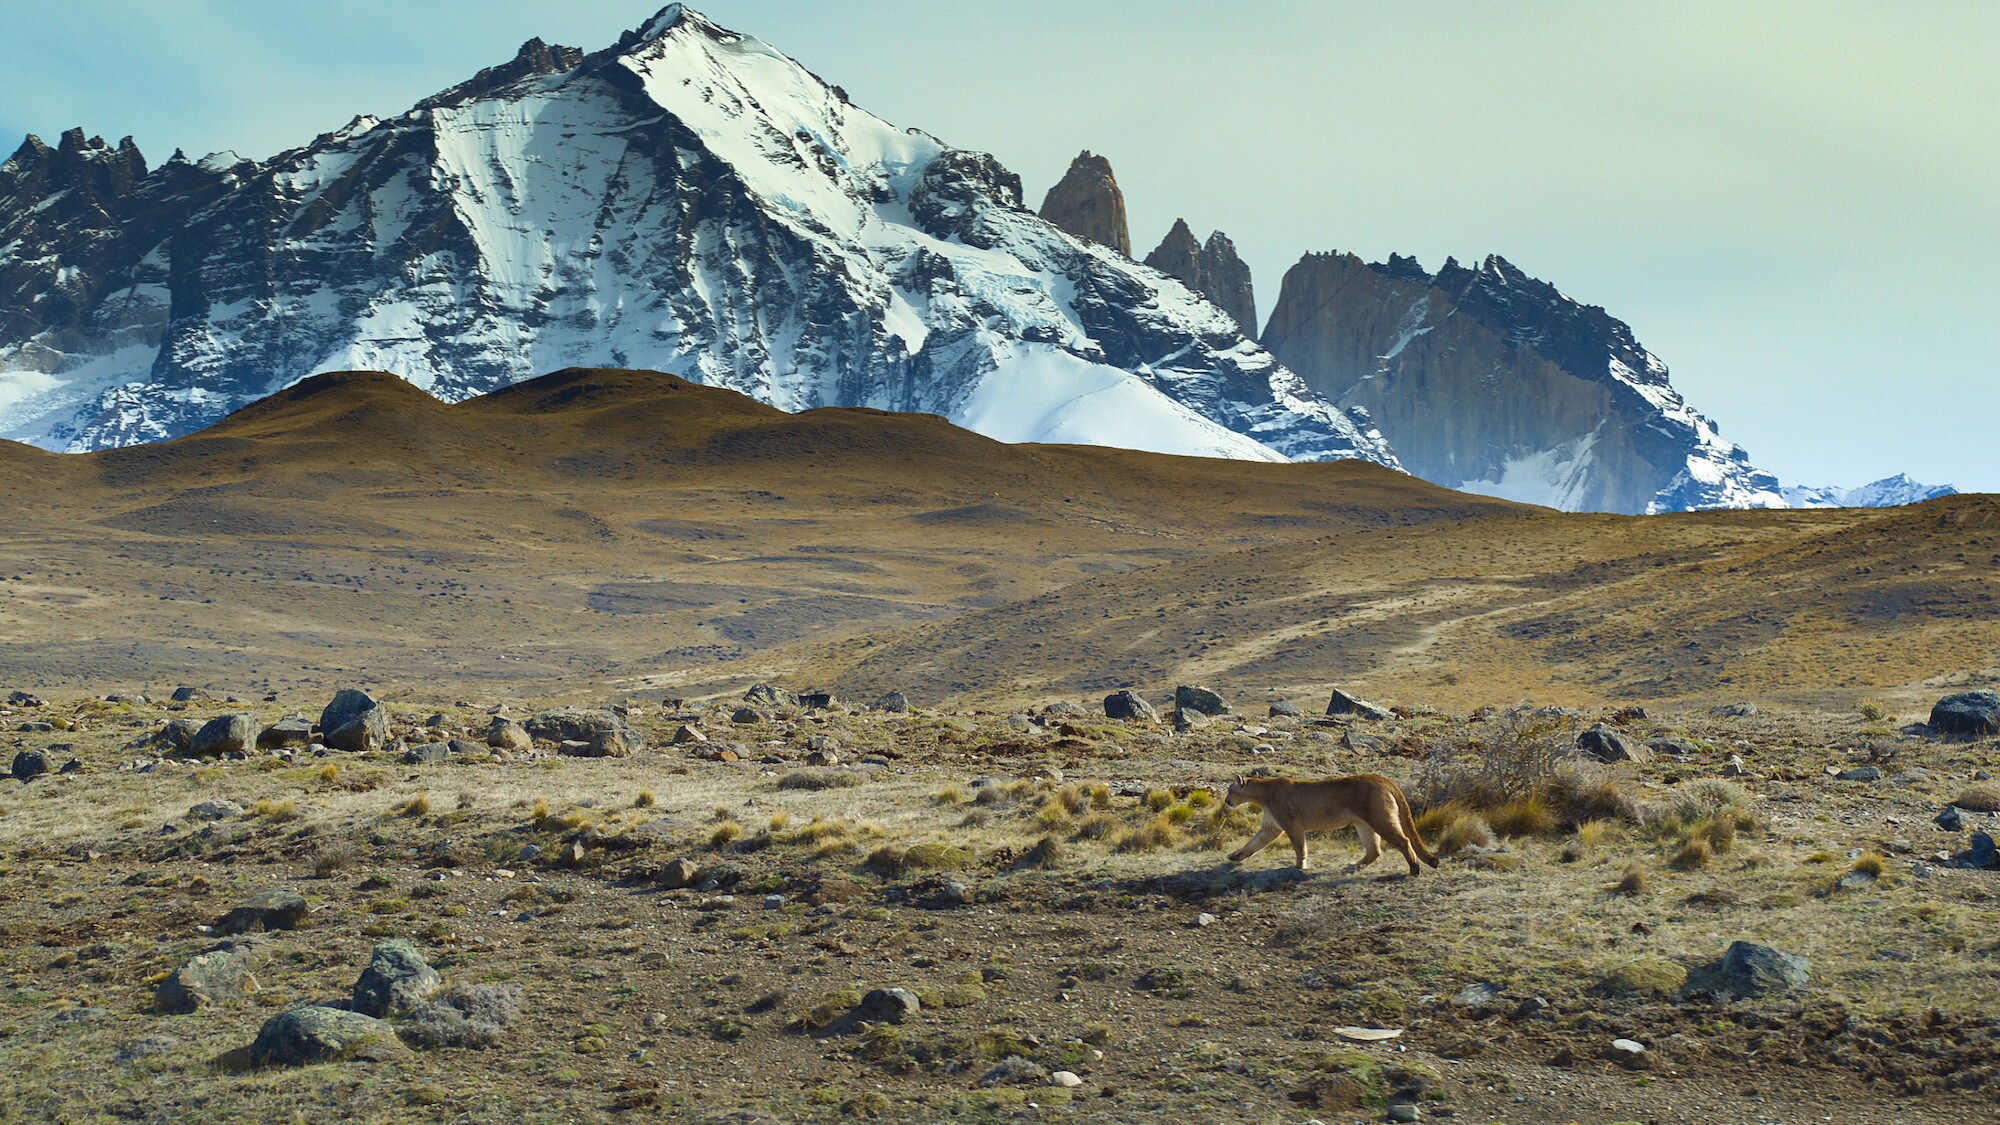 A puma walking across plains. (National Geographic for Disney+/Bertie Gregory)